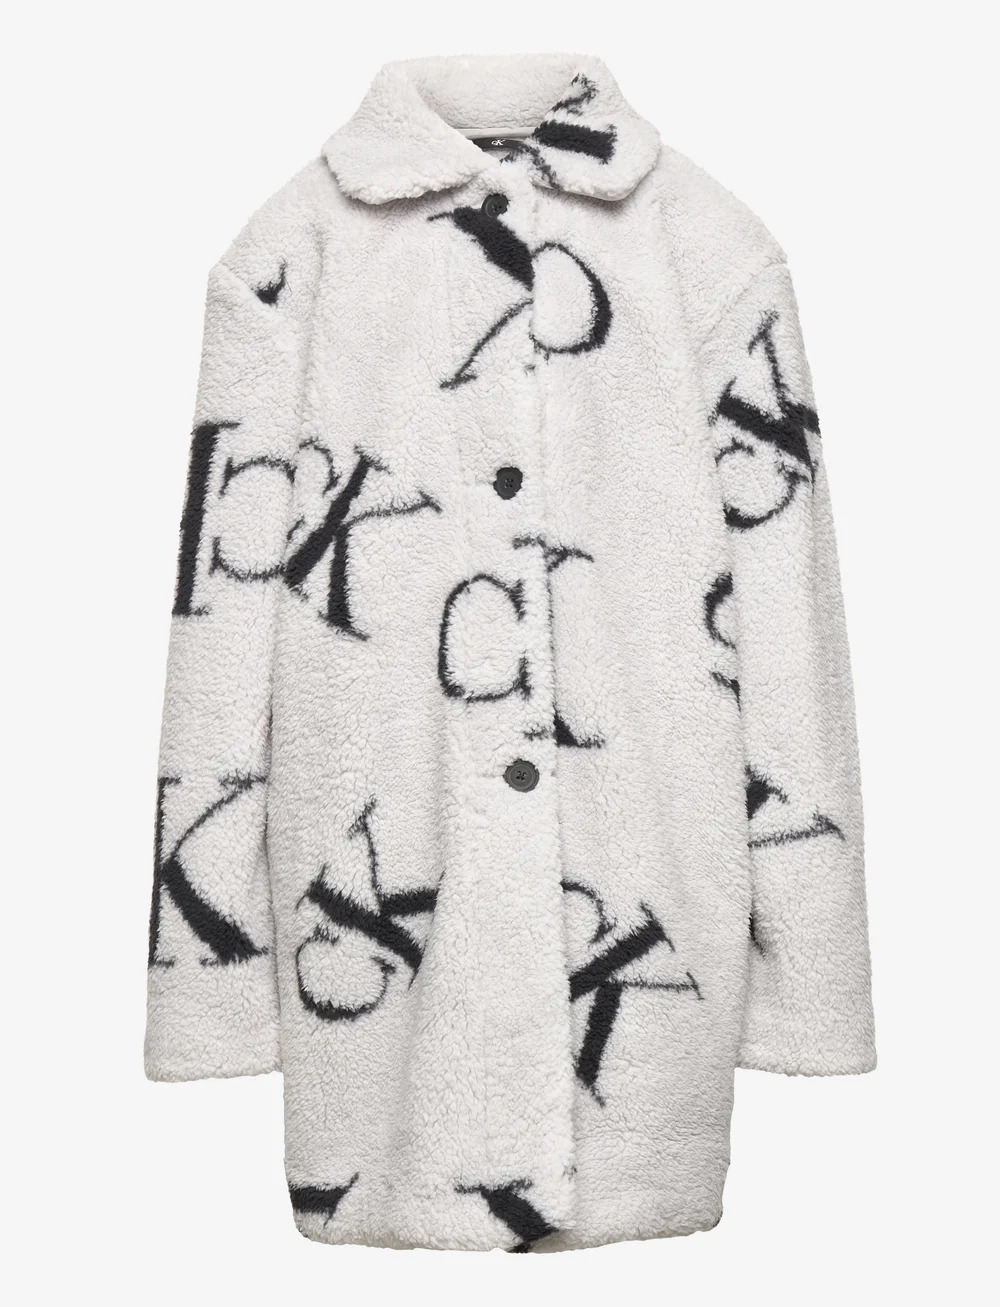 Calvin Klein Monogram Aop Teddy Coat - 199.90 €. Buy Faux fur from Calvin  Klein online at . Fast delivery and easy returns